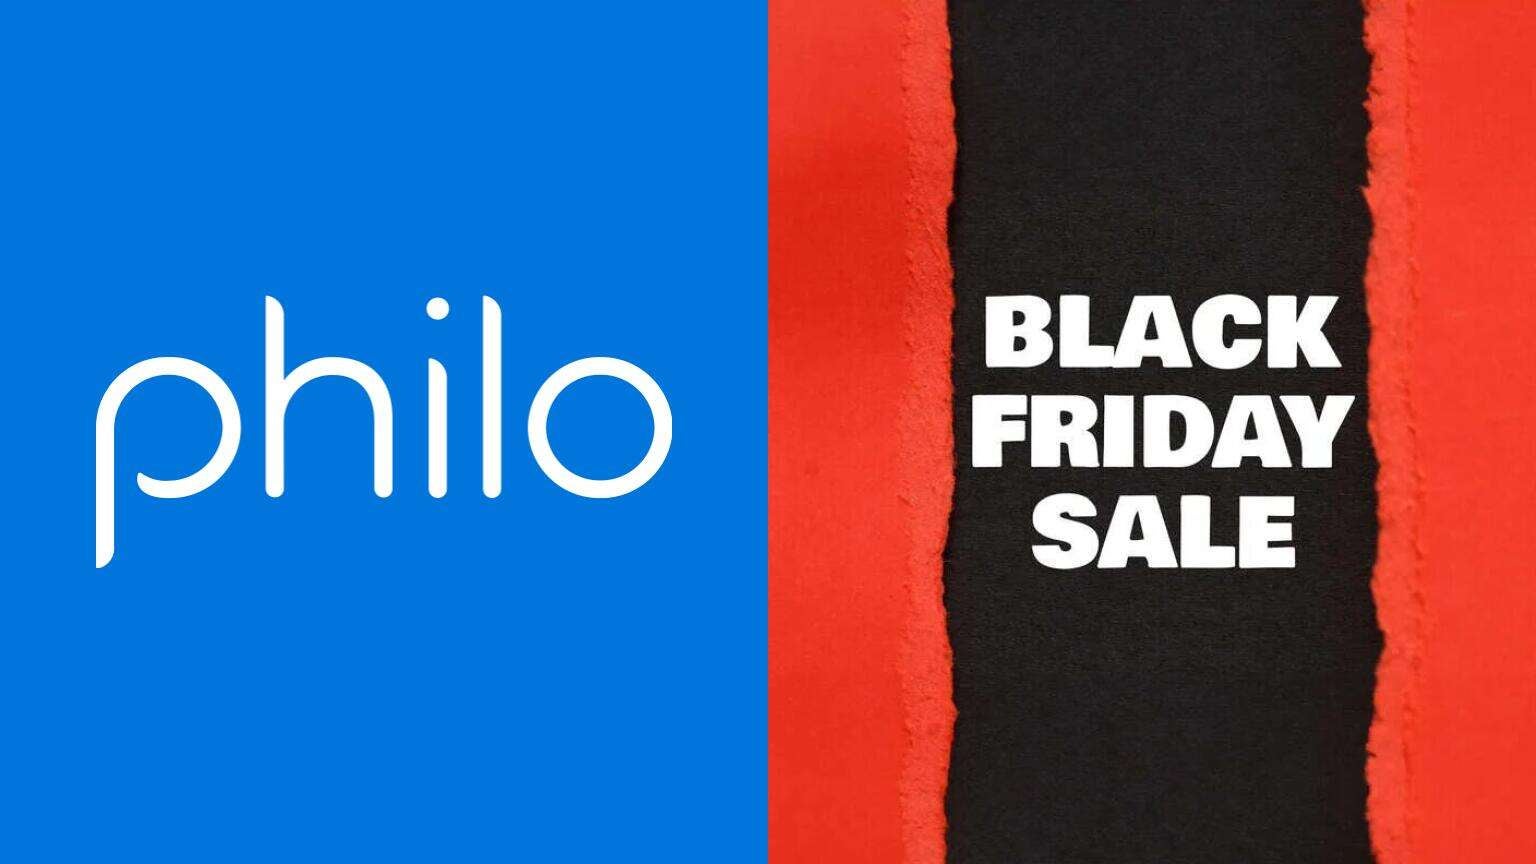 Philo Black Friday Deal Get 50 Off Your First Month of Live TV The